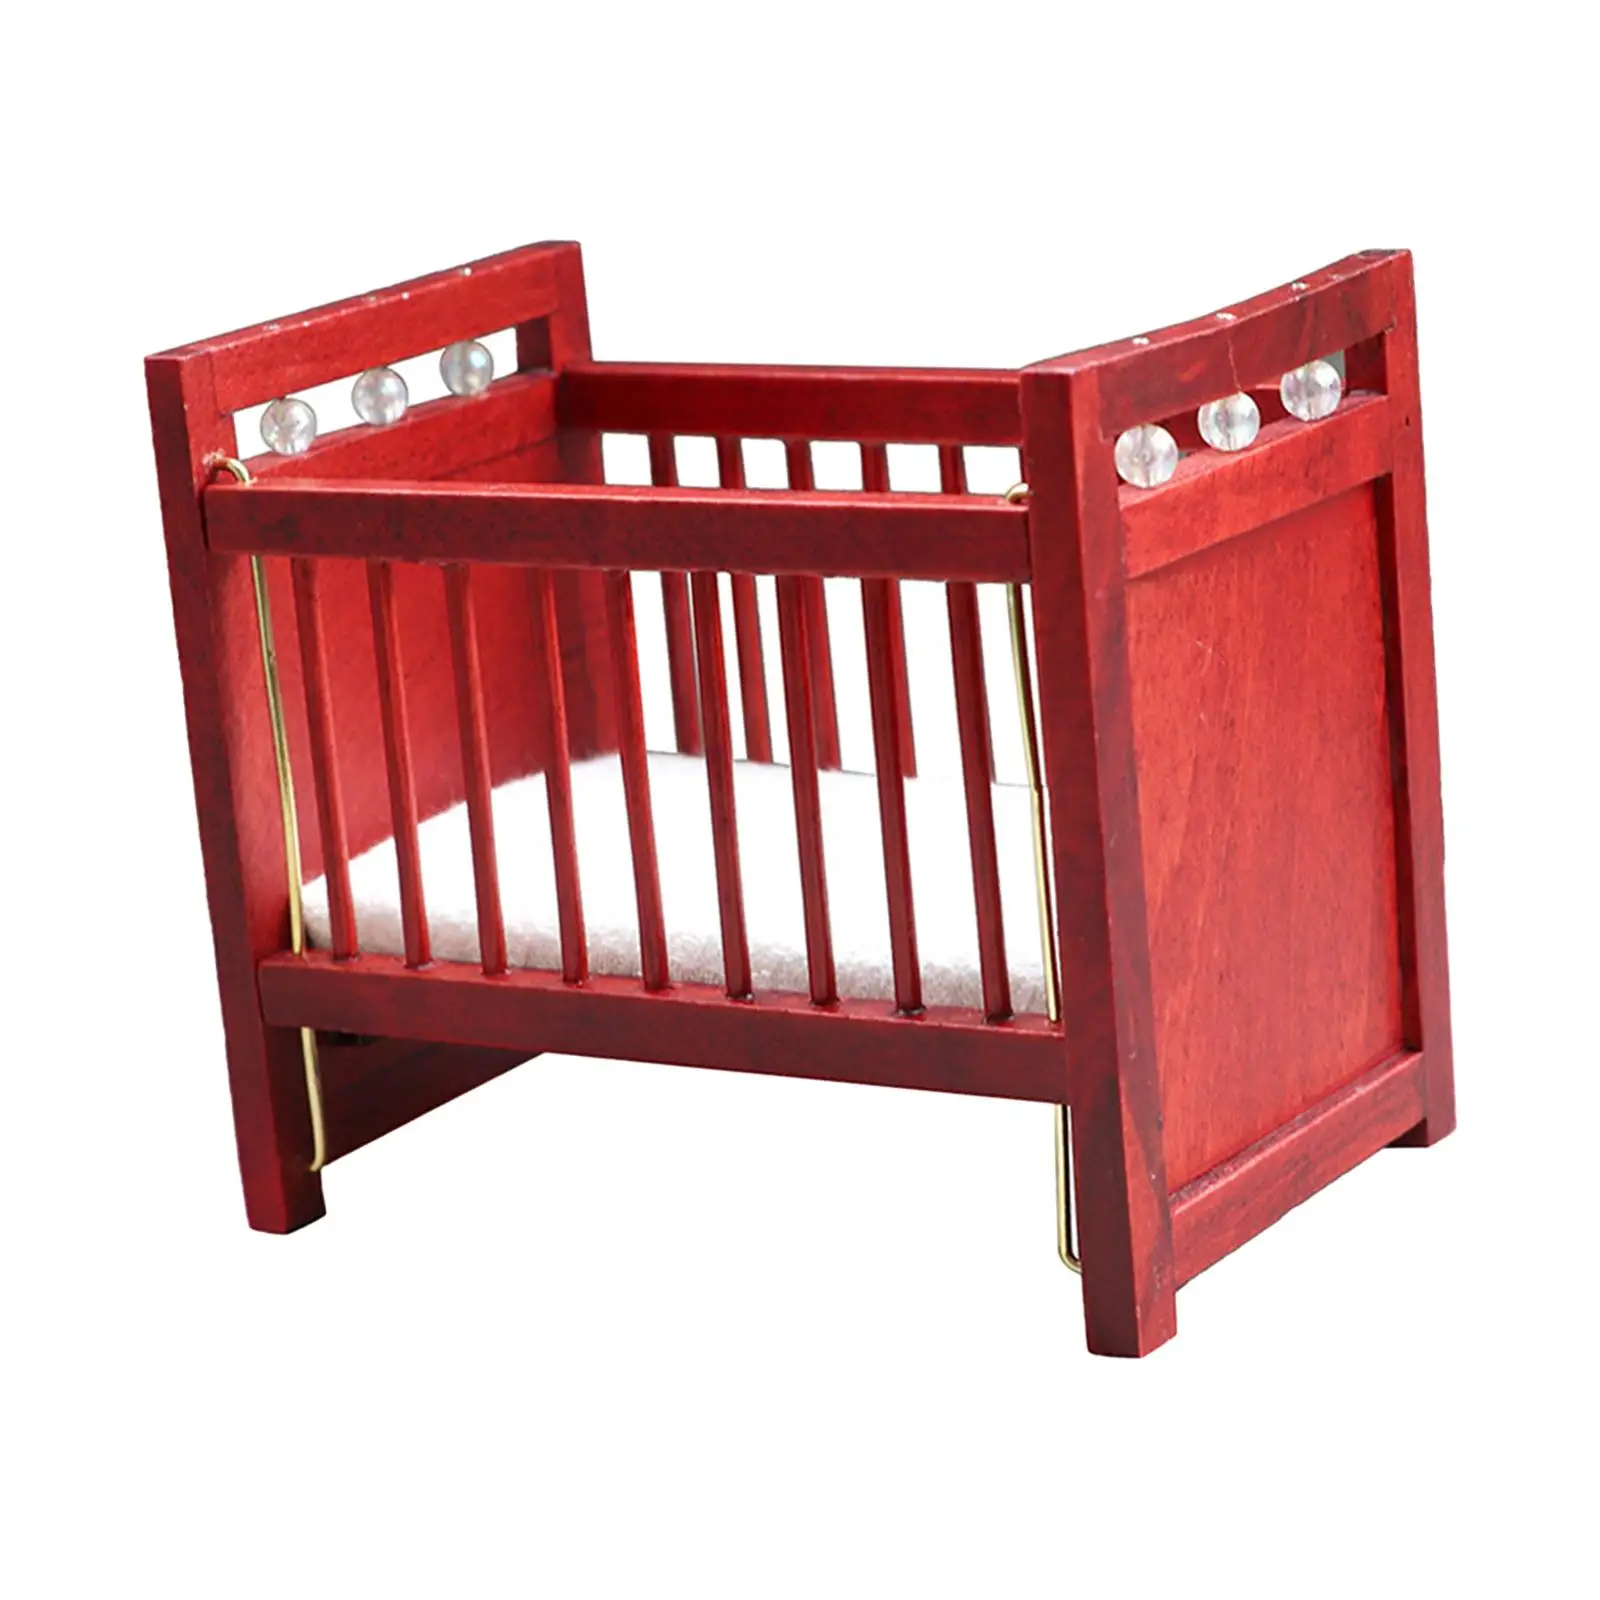 Crib Bedroom Red Doll House Scene 1/12 Play Toy Photo Props Miniature Dollhouse Bed Dollhouse Furniture Bed Model Decor